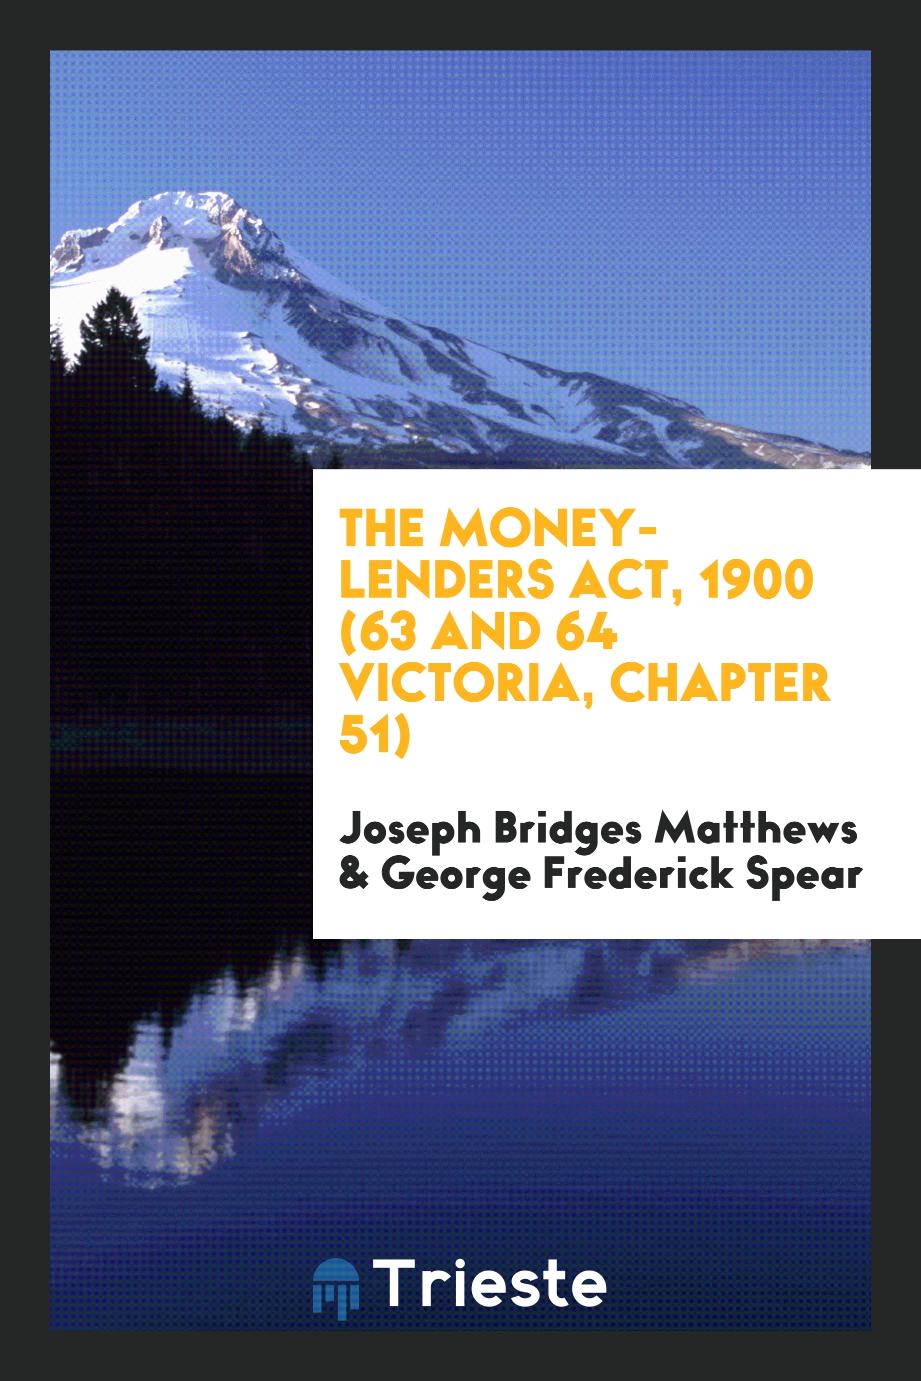 The Money-Lenders Act, 1900 (63 and 64 Victoria, Chapter 51)